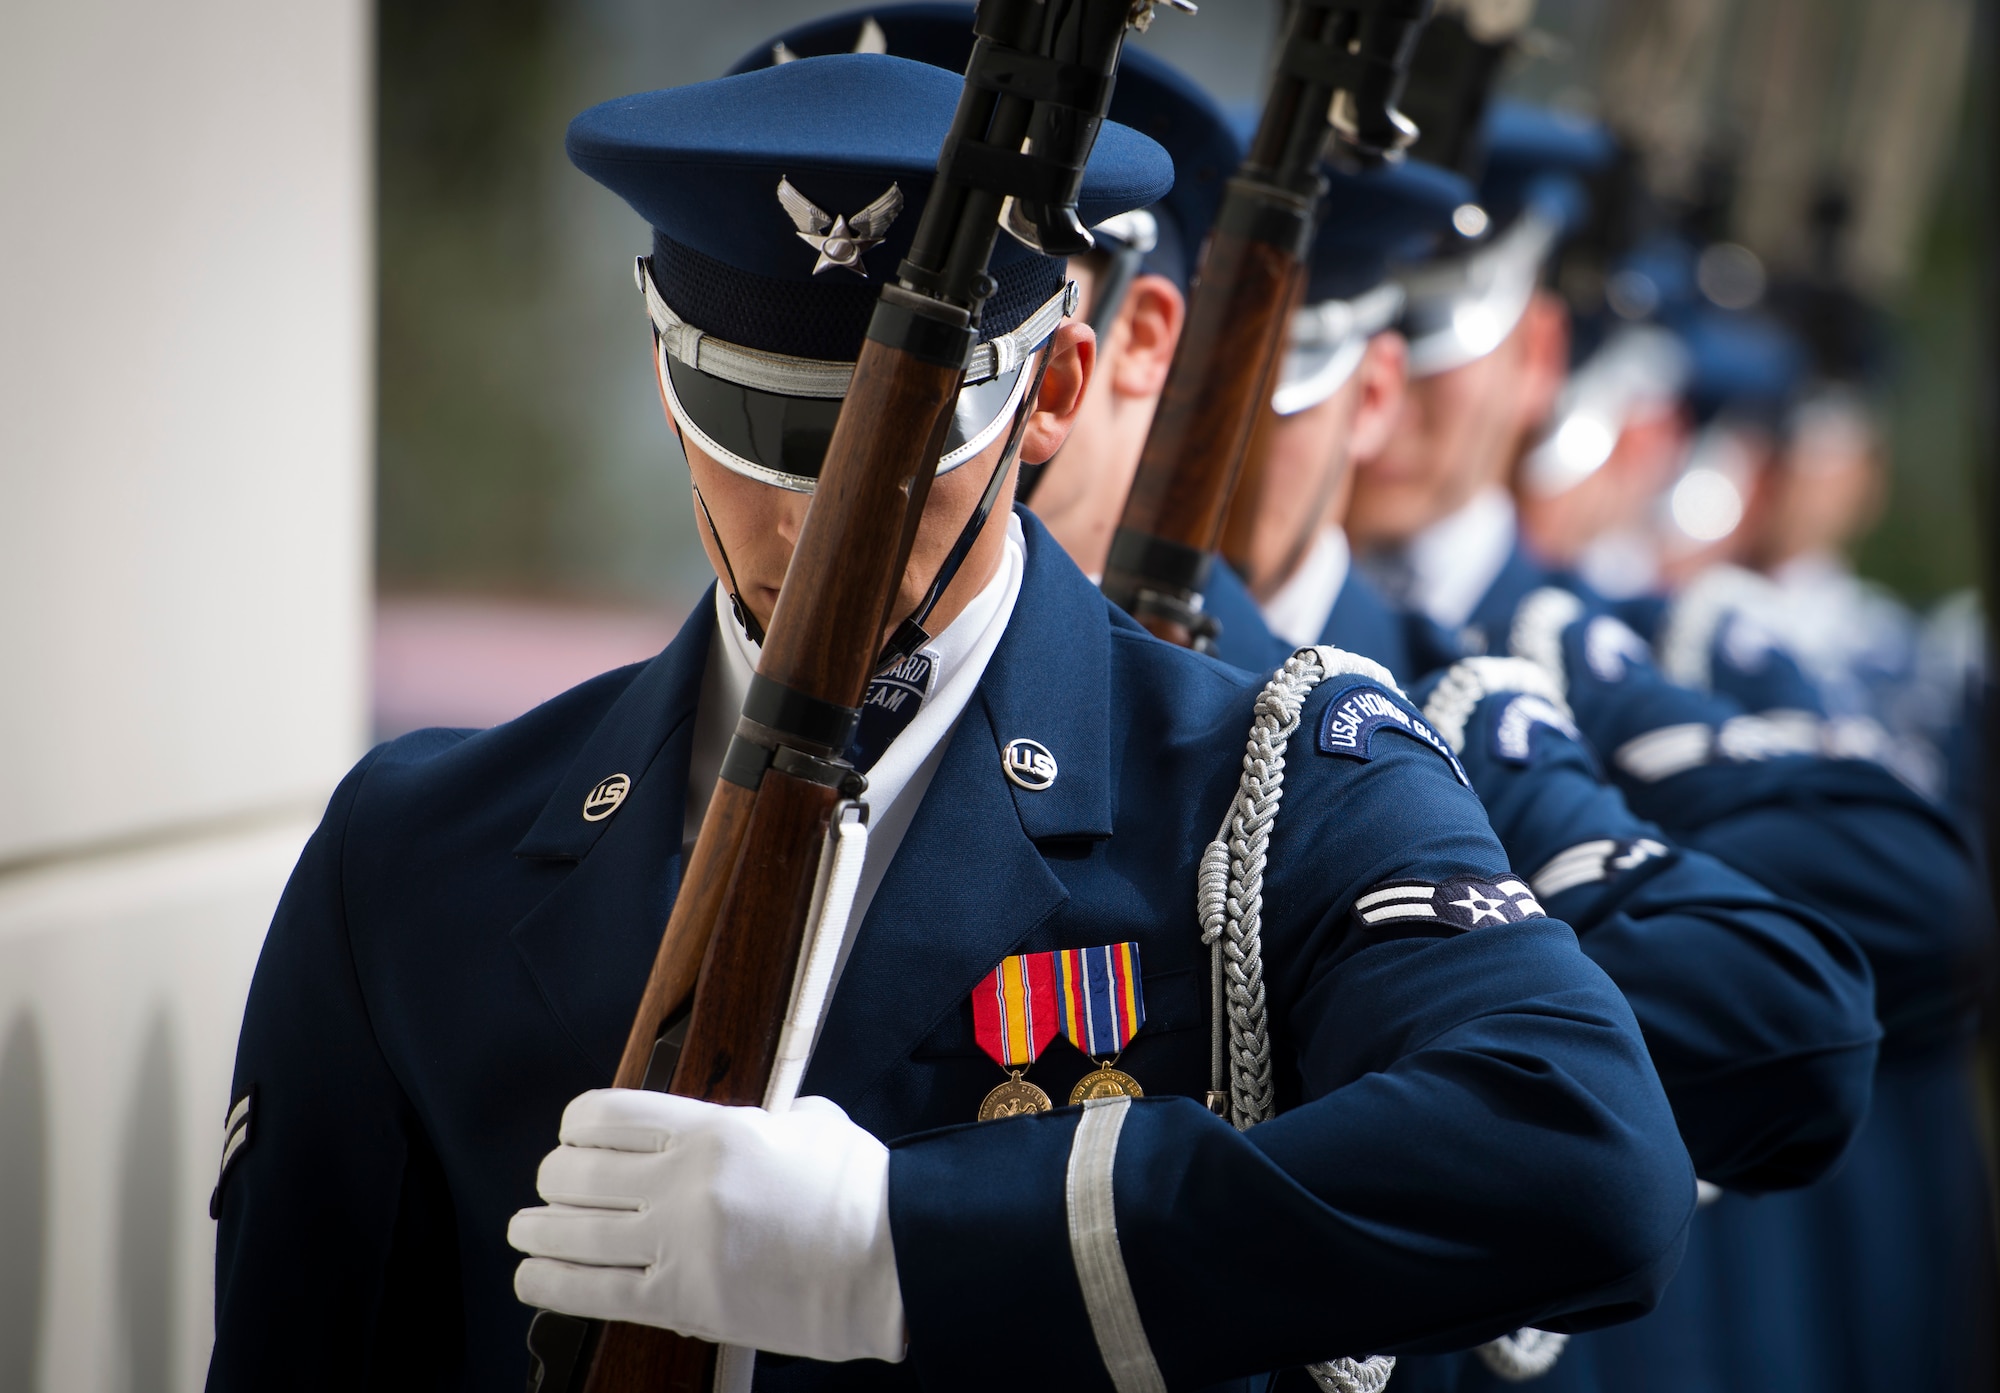 Members of the United States Air Force Honor Guard drill team march in to the gymnasium at Oak Ridge High School, Orlando, Fla. Jan. 21, 2016. The Drill Team performed in front of hundreds of students and afterward held a training session with the Junior Reserve Officer Training Corps cadets. (U.S. Air Force photo by Staff Sgt. Chad C. Strohmeyer/Released)